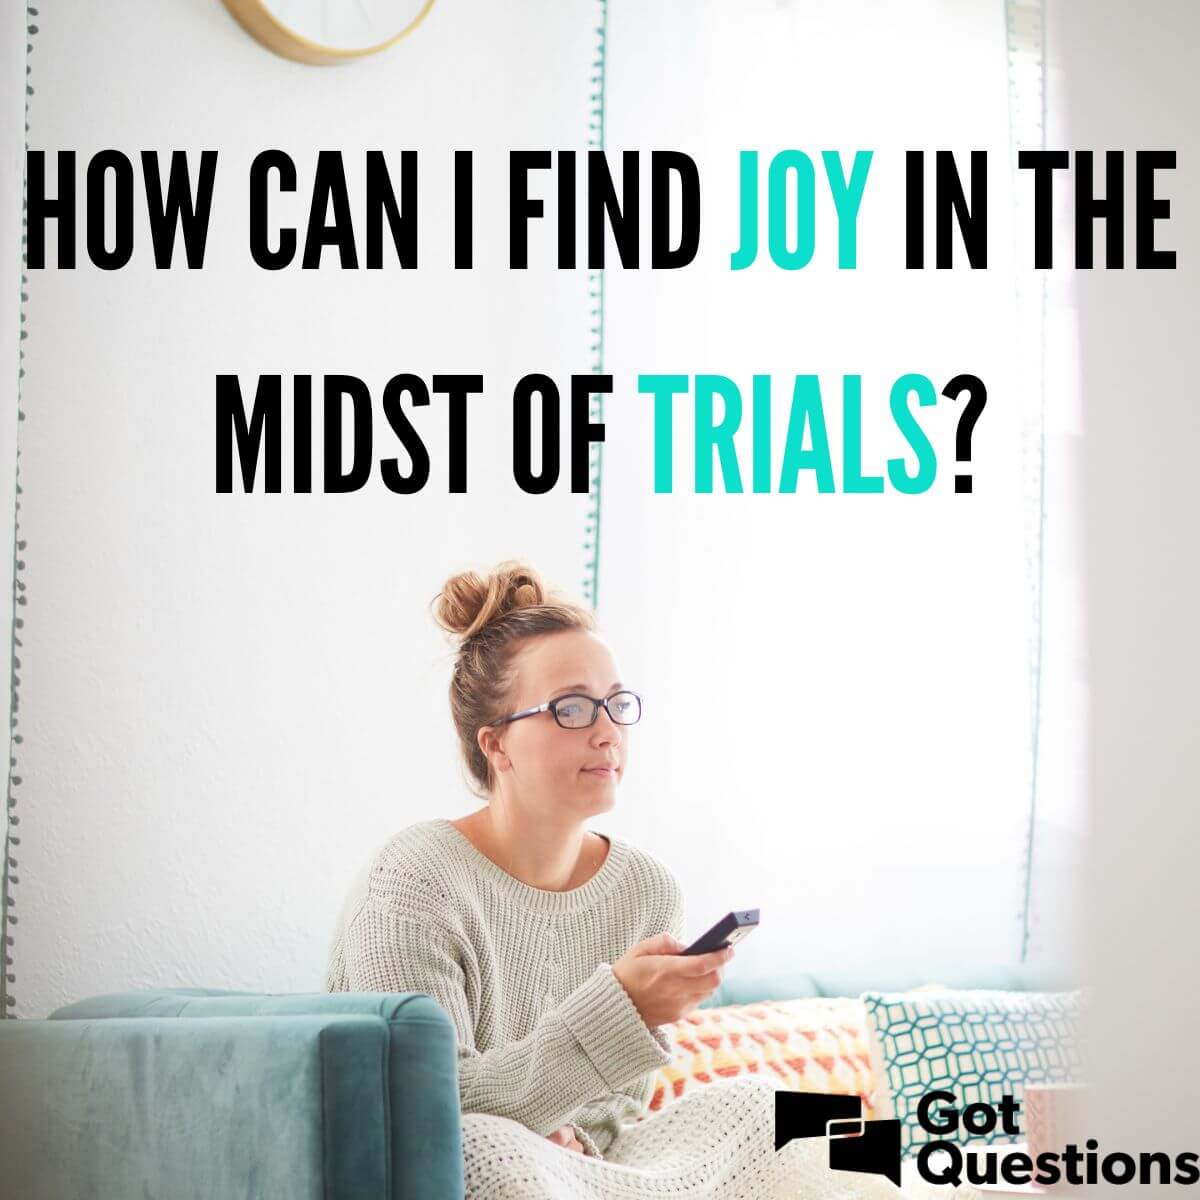 How can I find joy in the midst of trials?